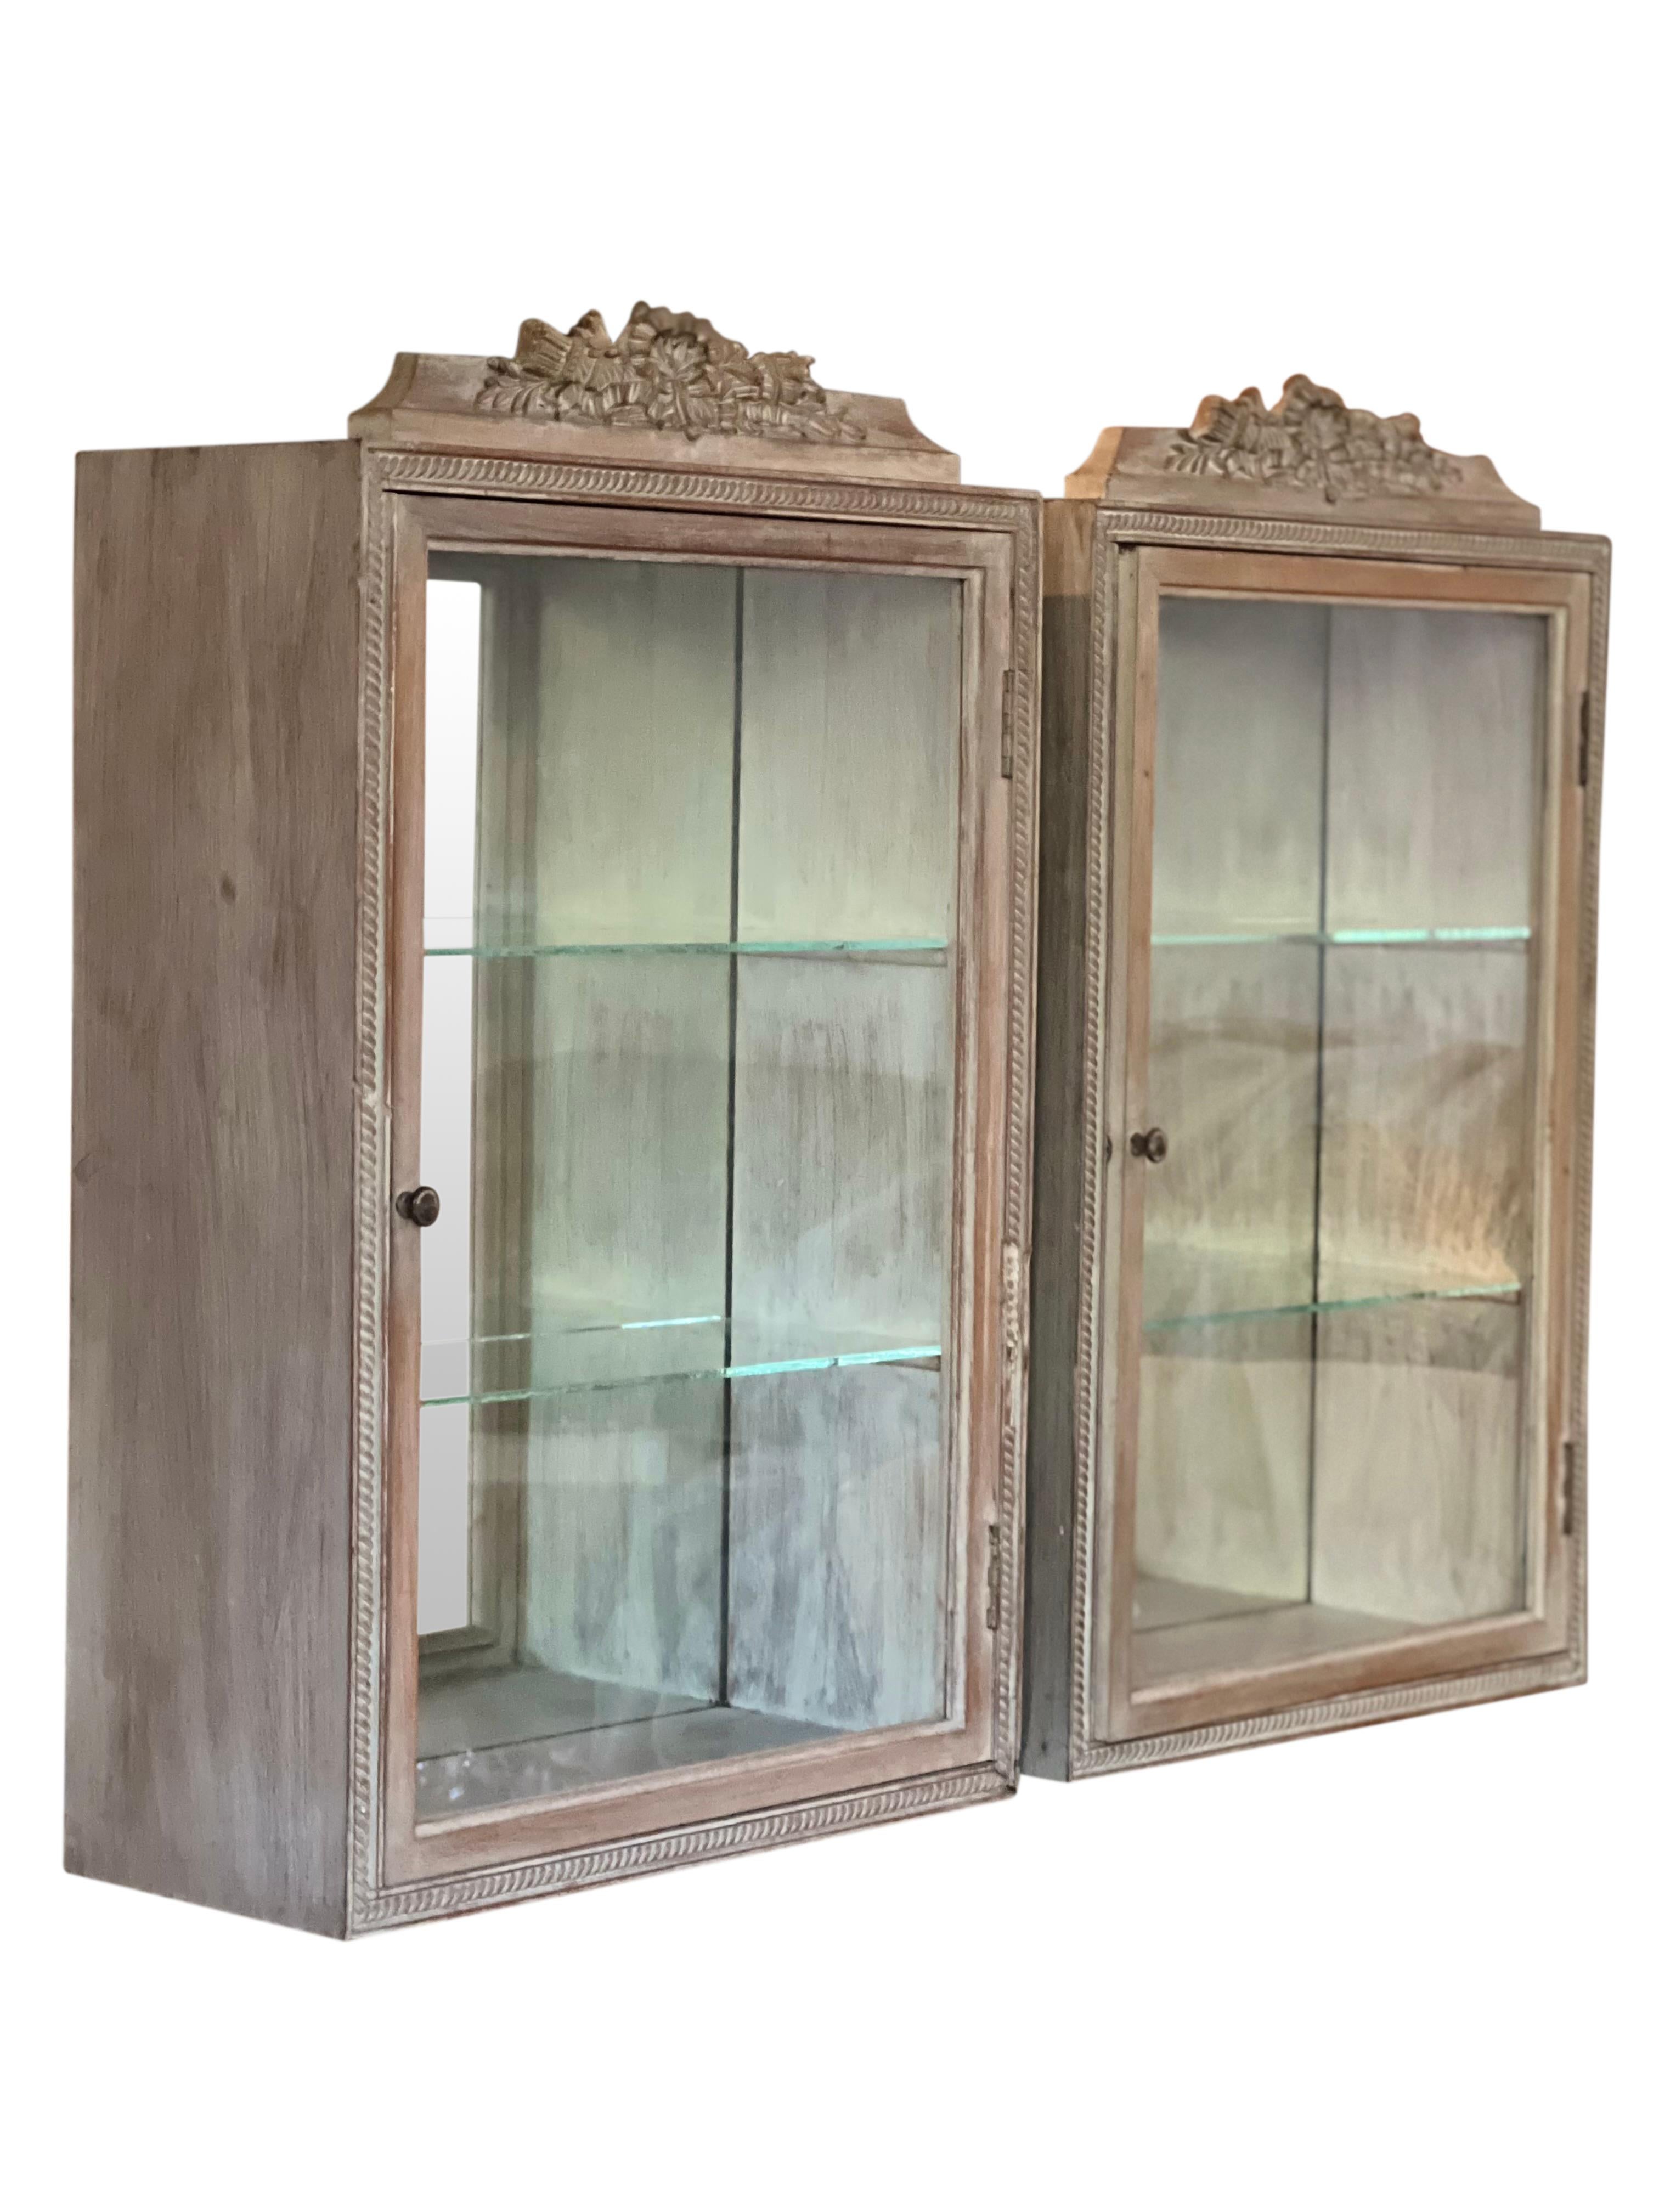 Gorgeous vintage Venetian hand painted and carved mirrored wall cabinets, early 20th century.

The cabinets feature a mirrored back and two glass shelves each. Intricately carved details of rope trim and a floral bouquet crest crafted from plaster